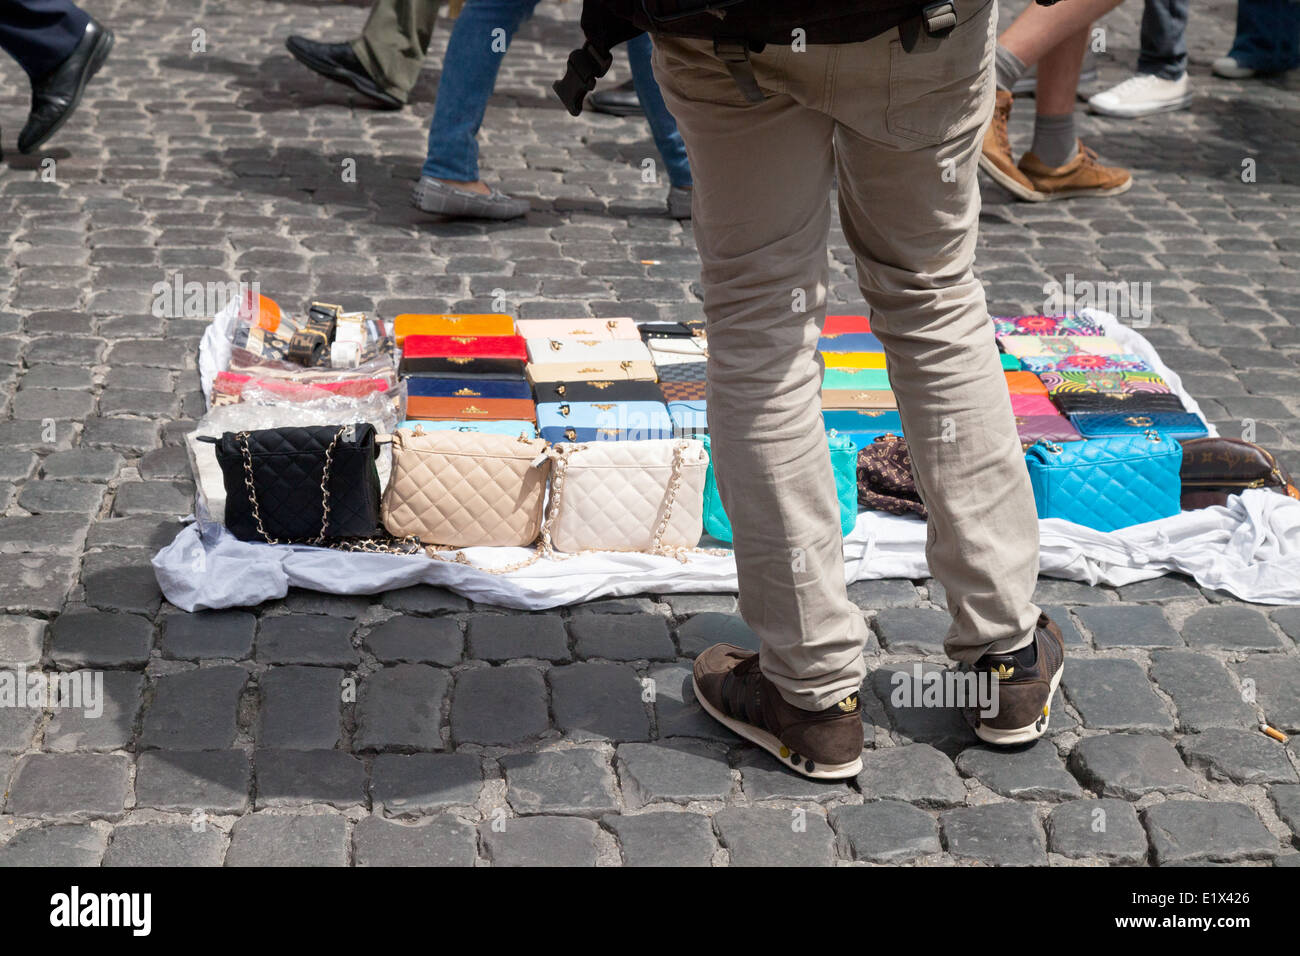 Street trader selling handbags on the cobbled streets of Rome, Italy Europe Stock Photo